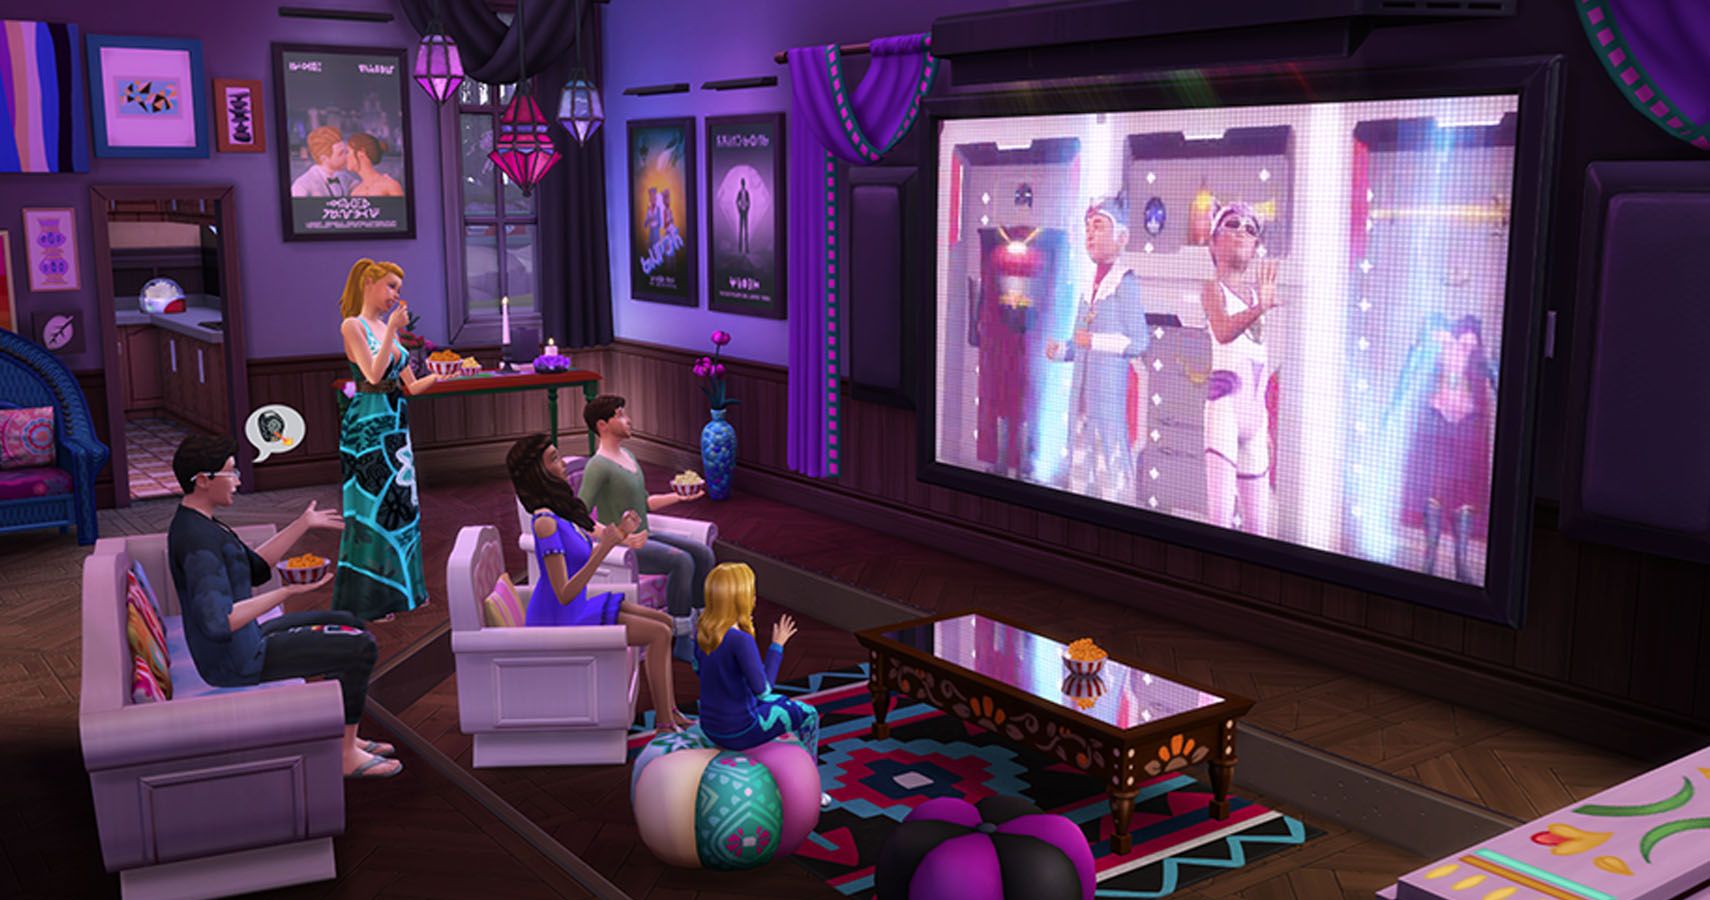 Sims gathered in a lounge to watch a movie on a huge tv.